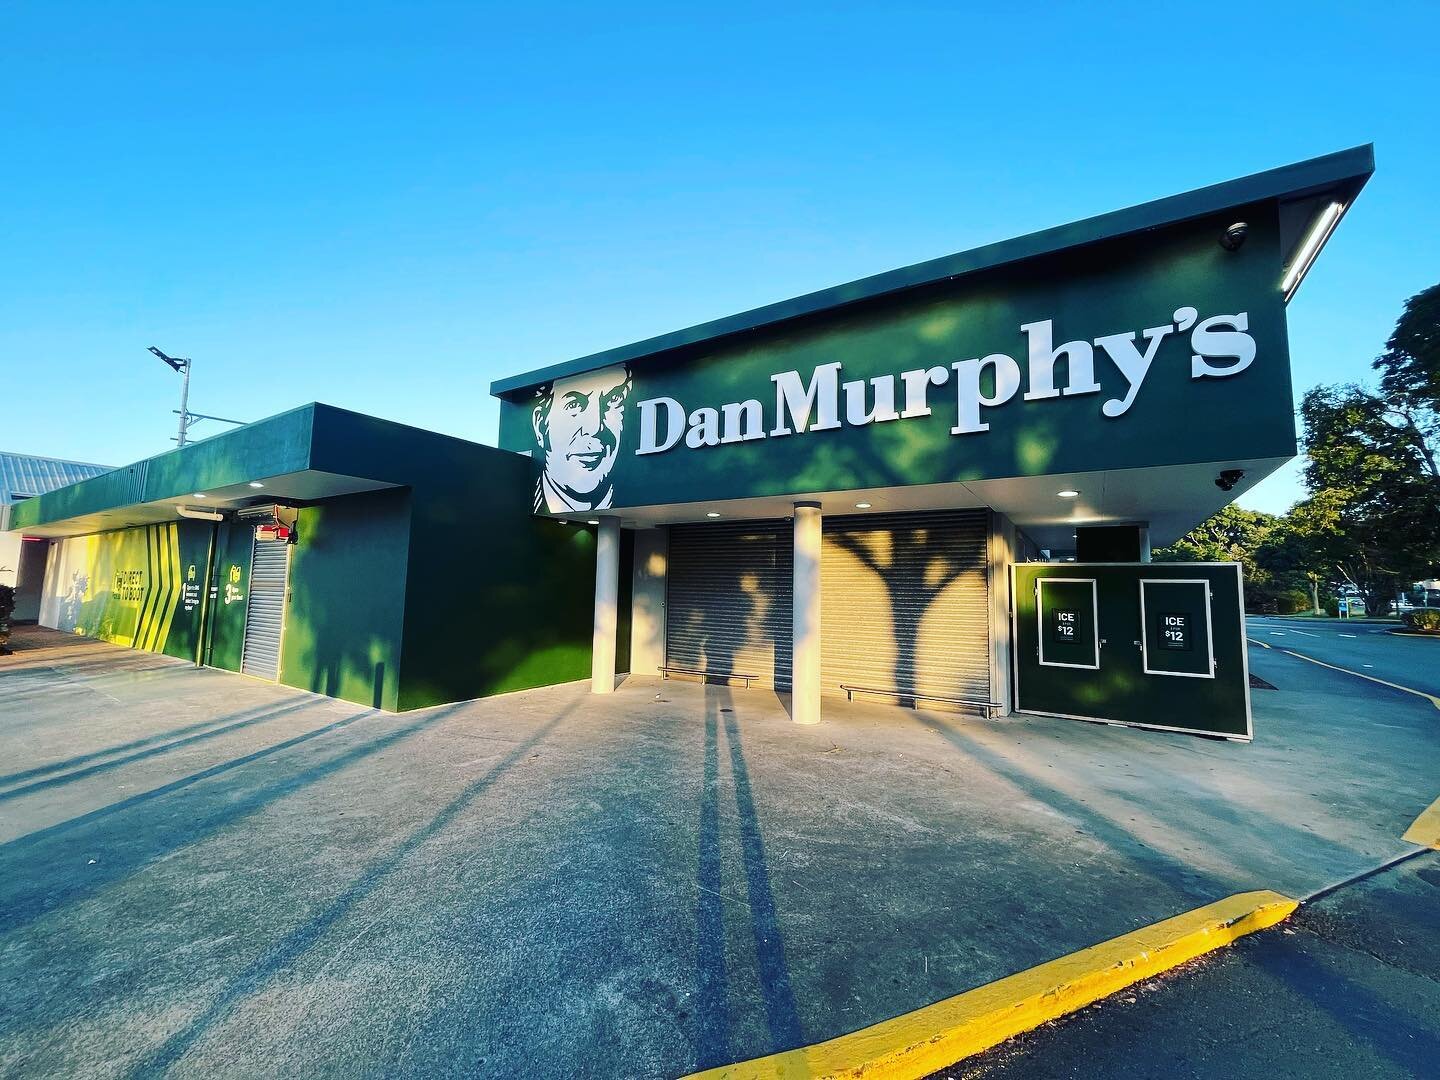 Another Dan Murphys done and dusted .
Smooth Project with a great outcome. 
Linking up with @ashley_cooper_construction 
Once again.
#commercialconstruction  #commercialplumbing #plumbers #plumblife #plumbing #danmurphys